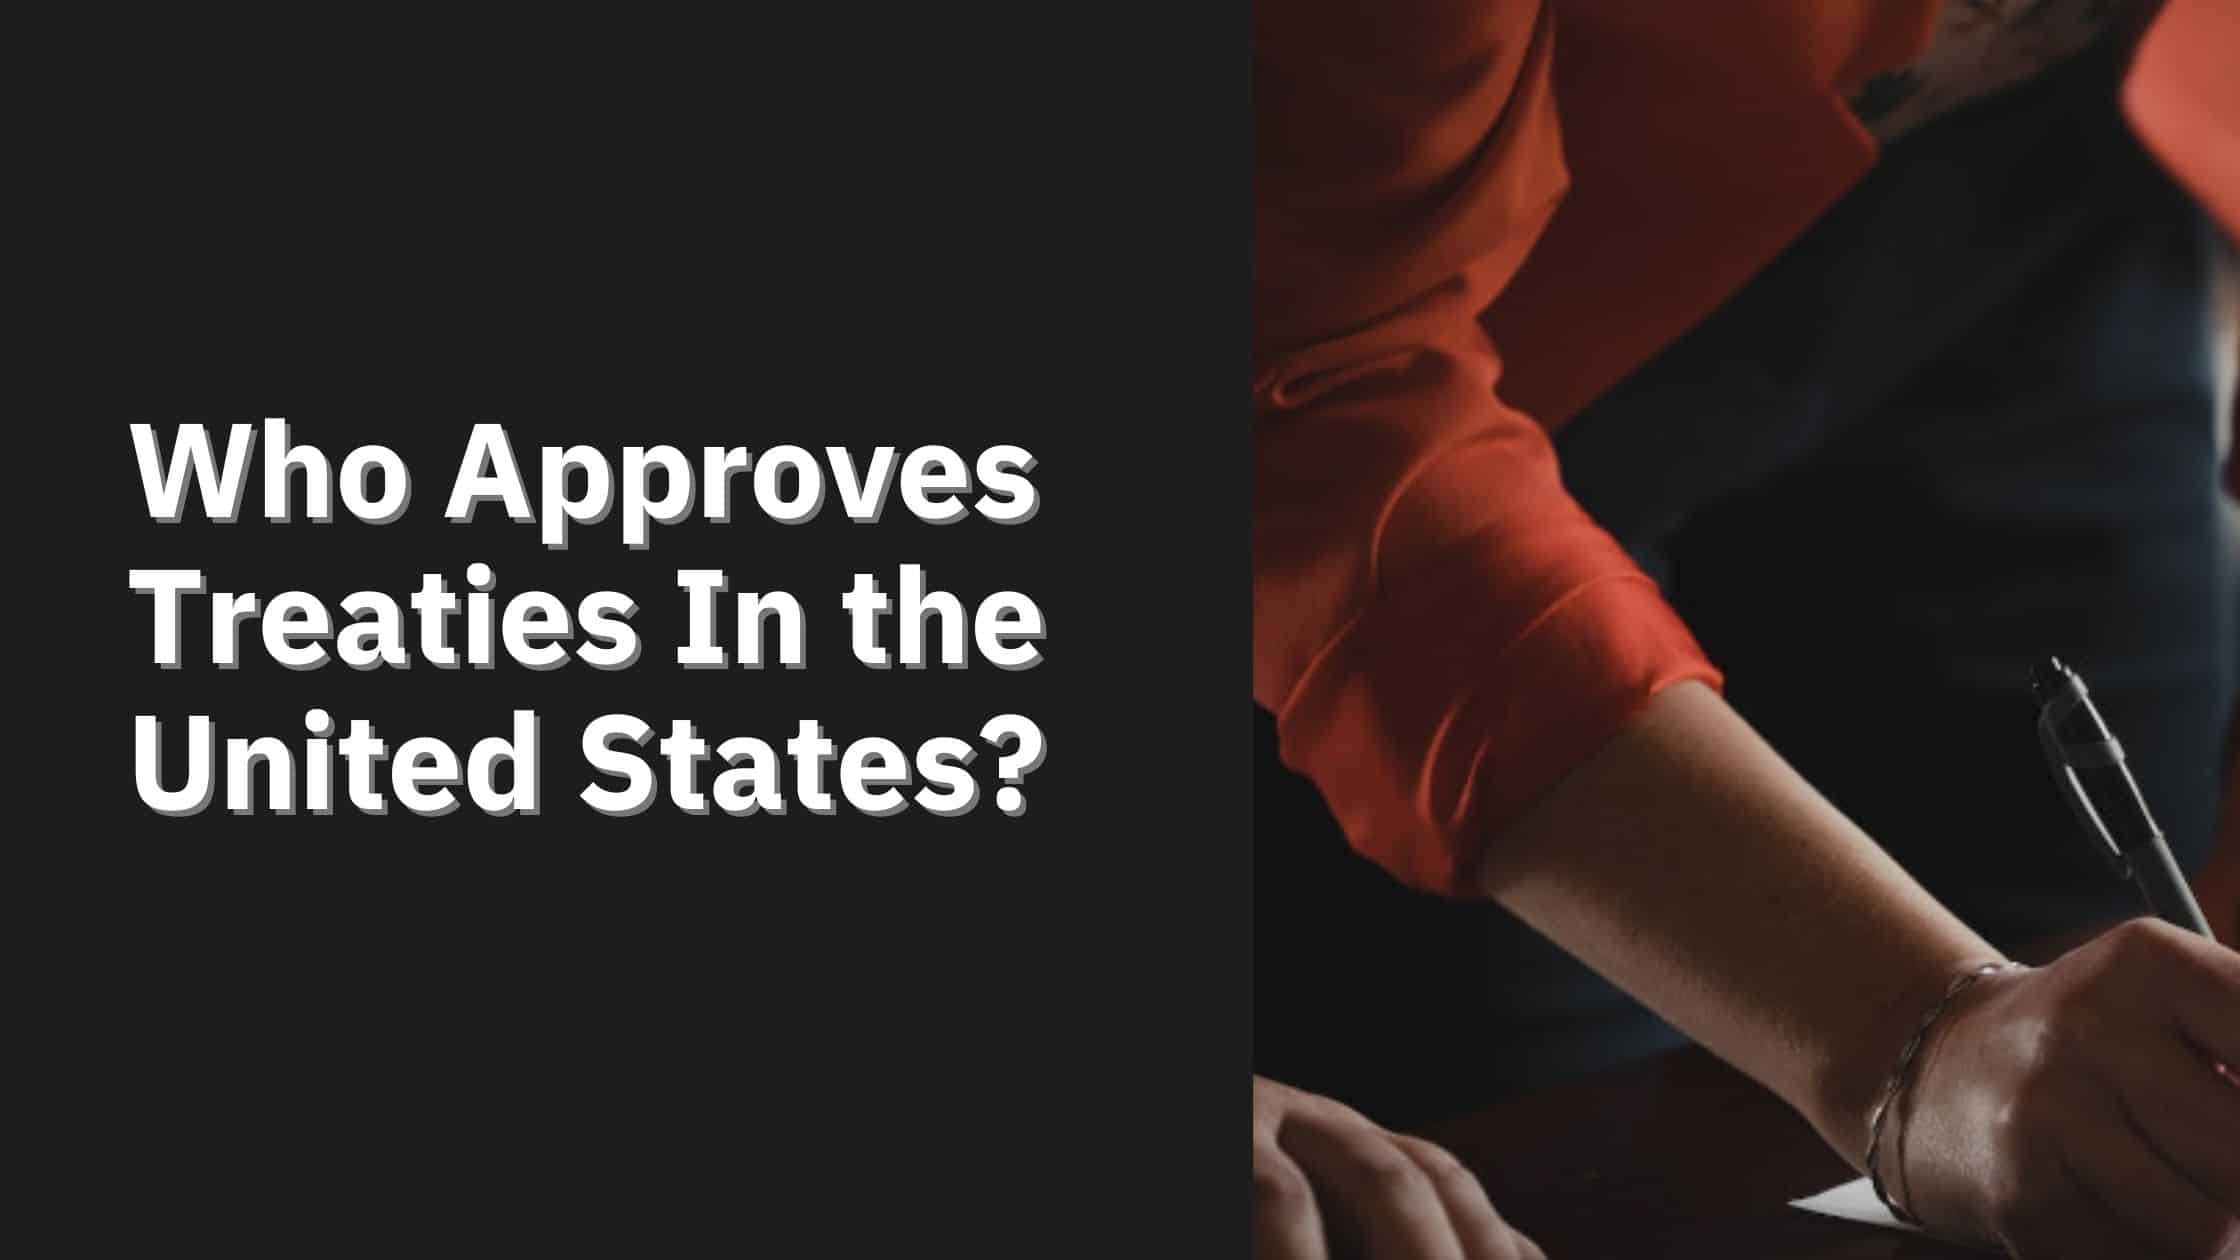 Who Approves Treaties In the United States?